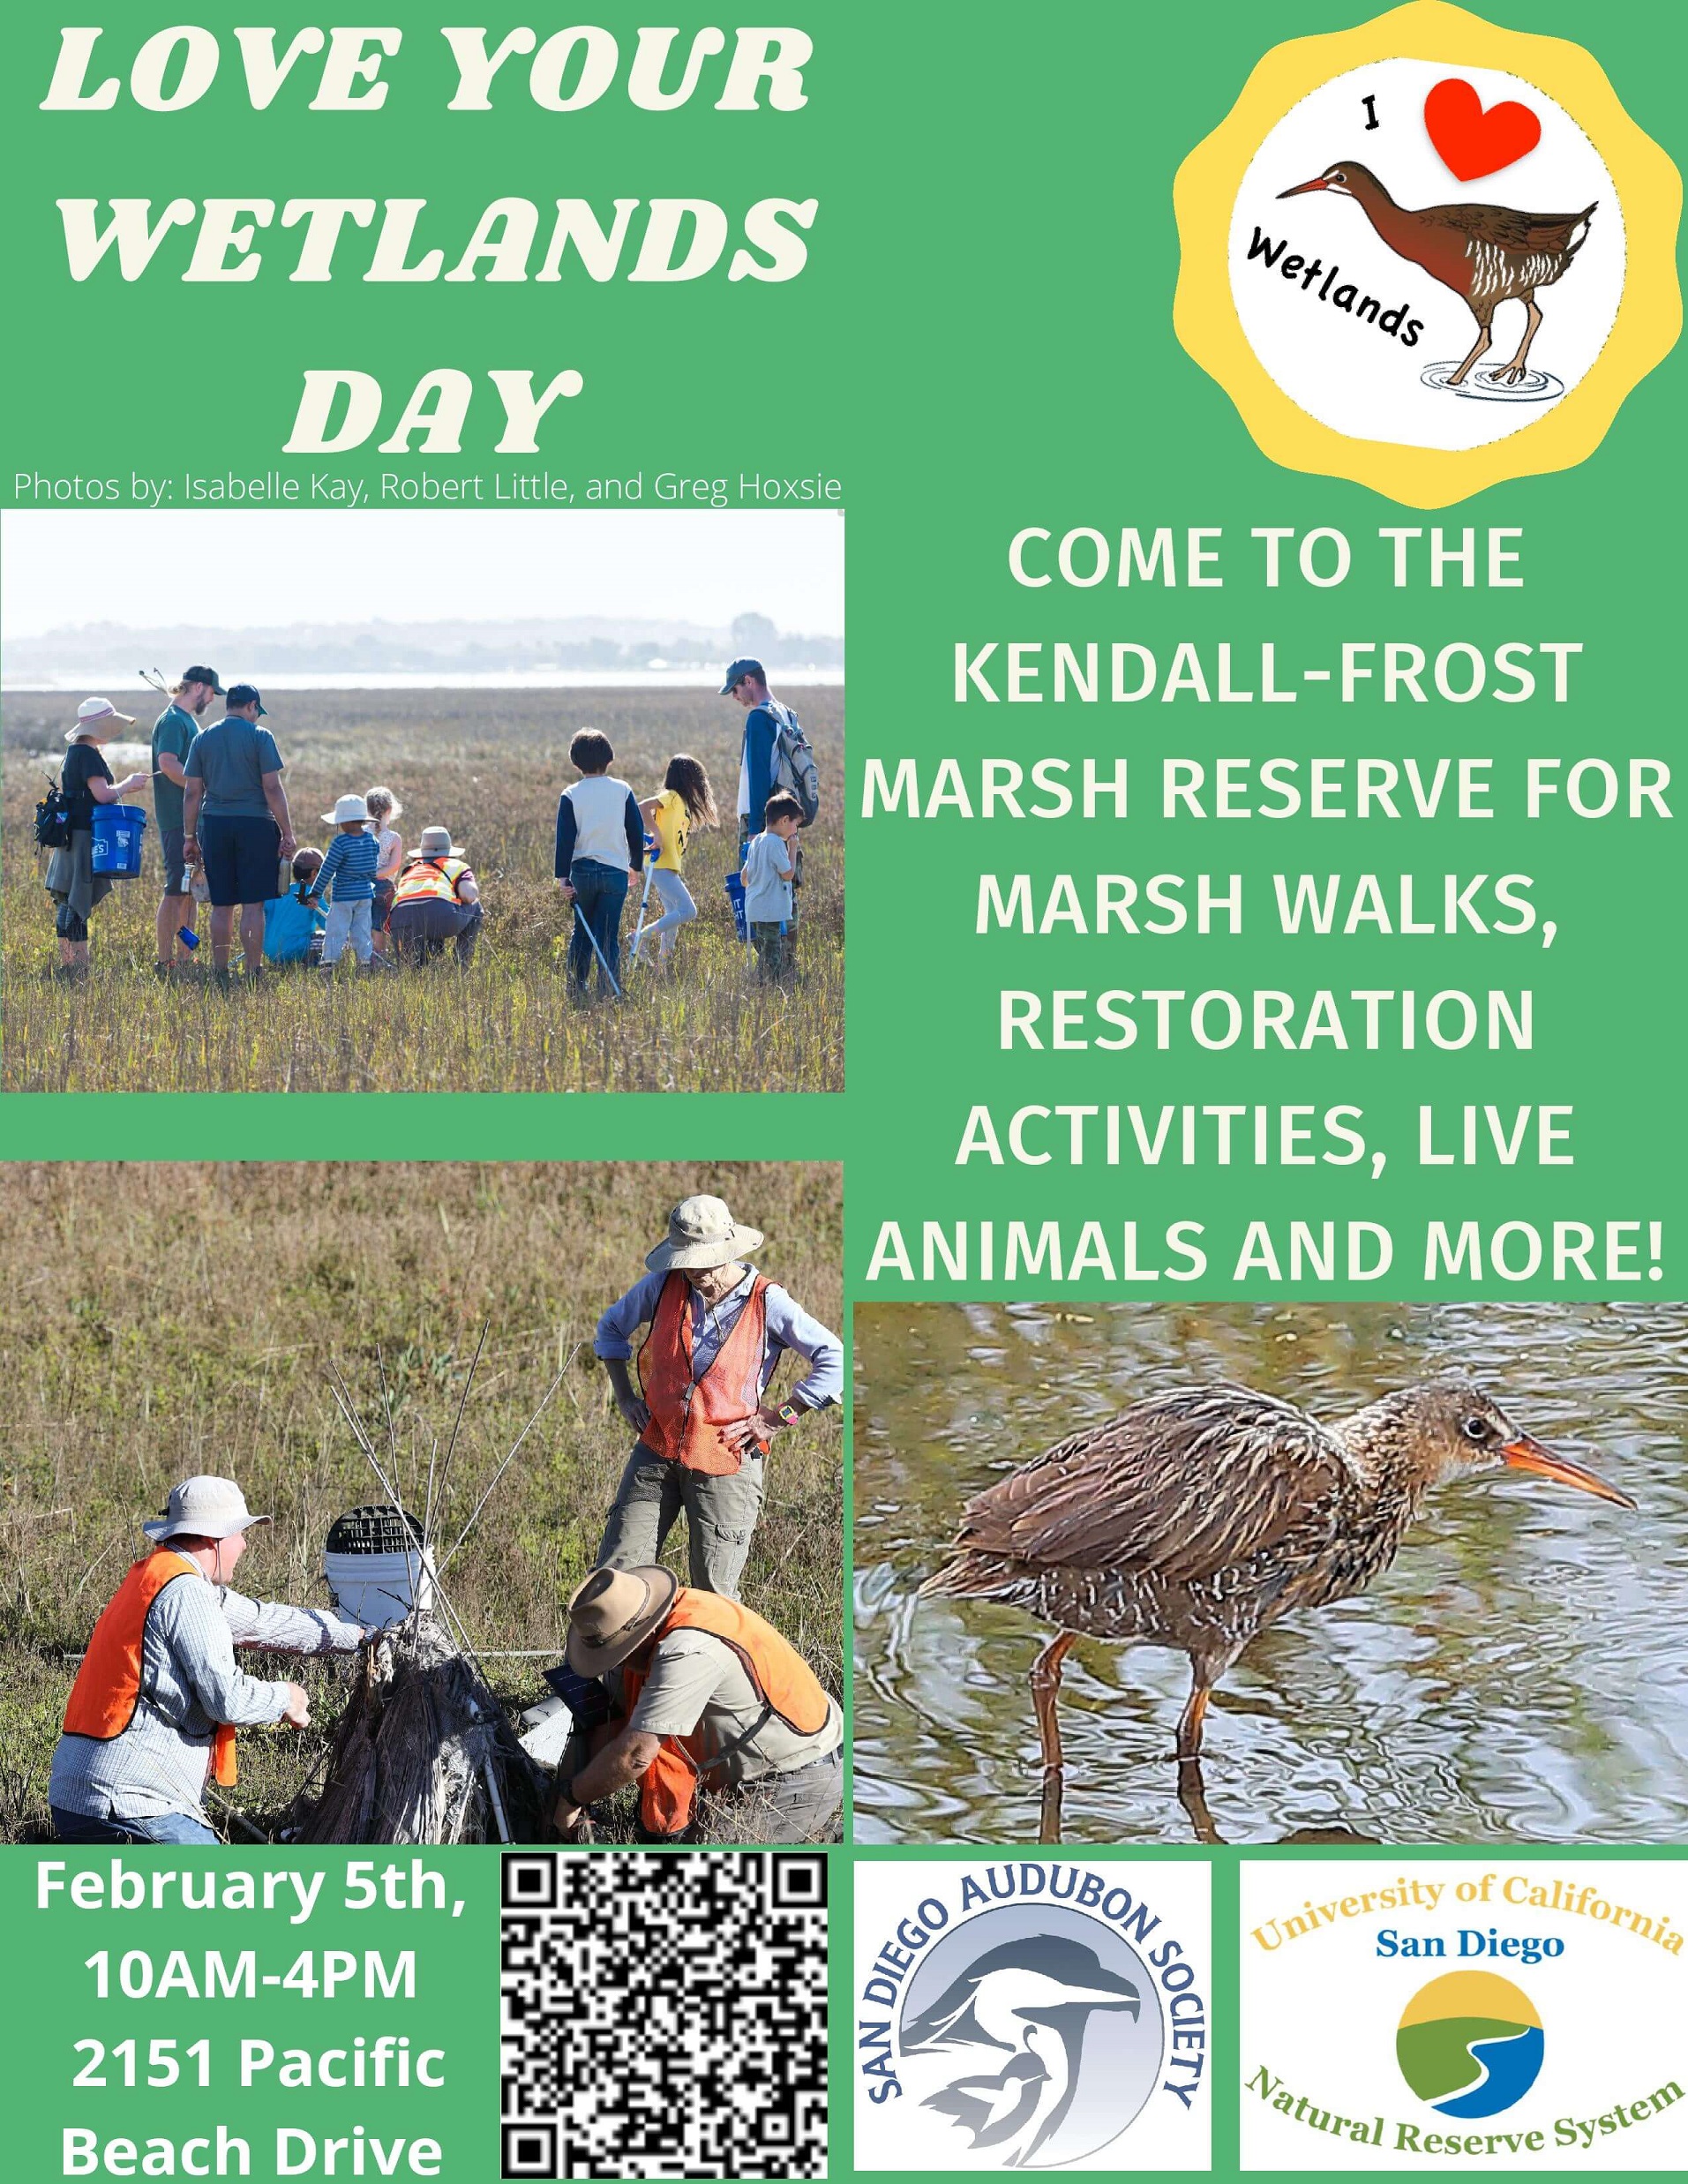 Flyer for Love Your Wetlands Day